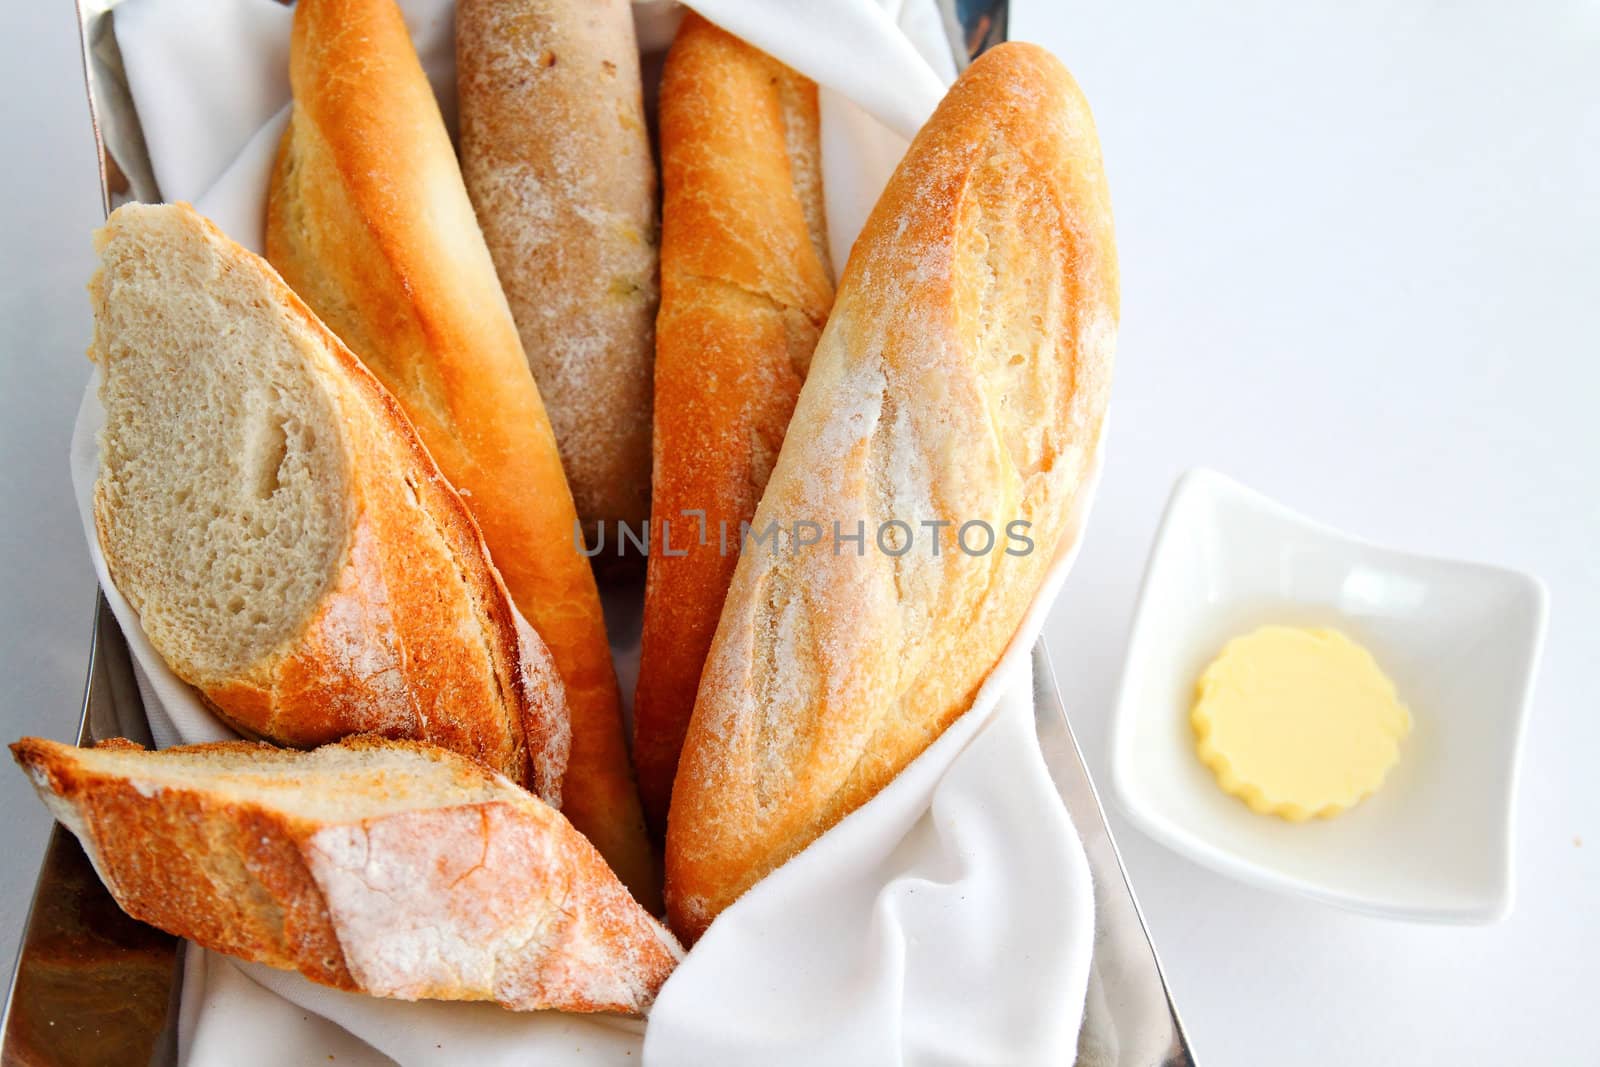 Sliced baguette with butter